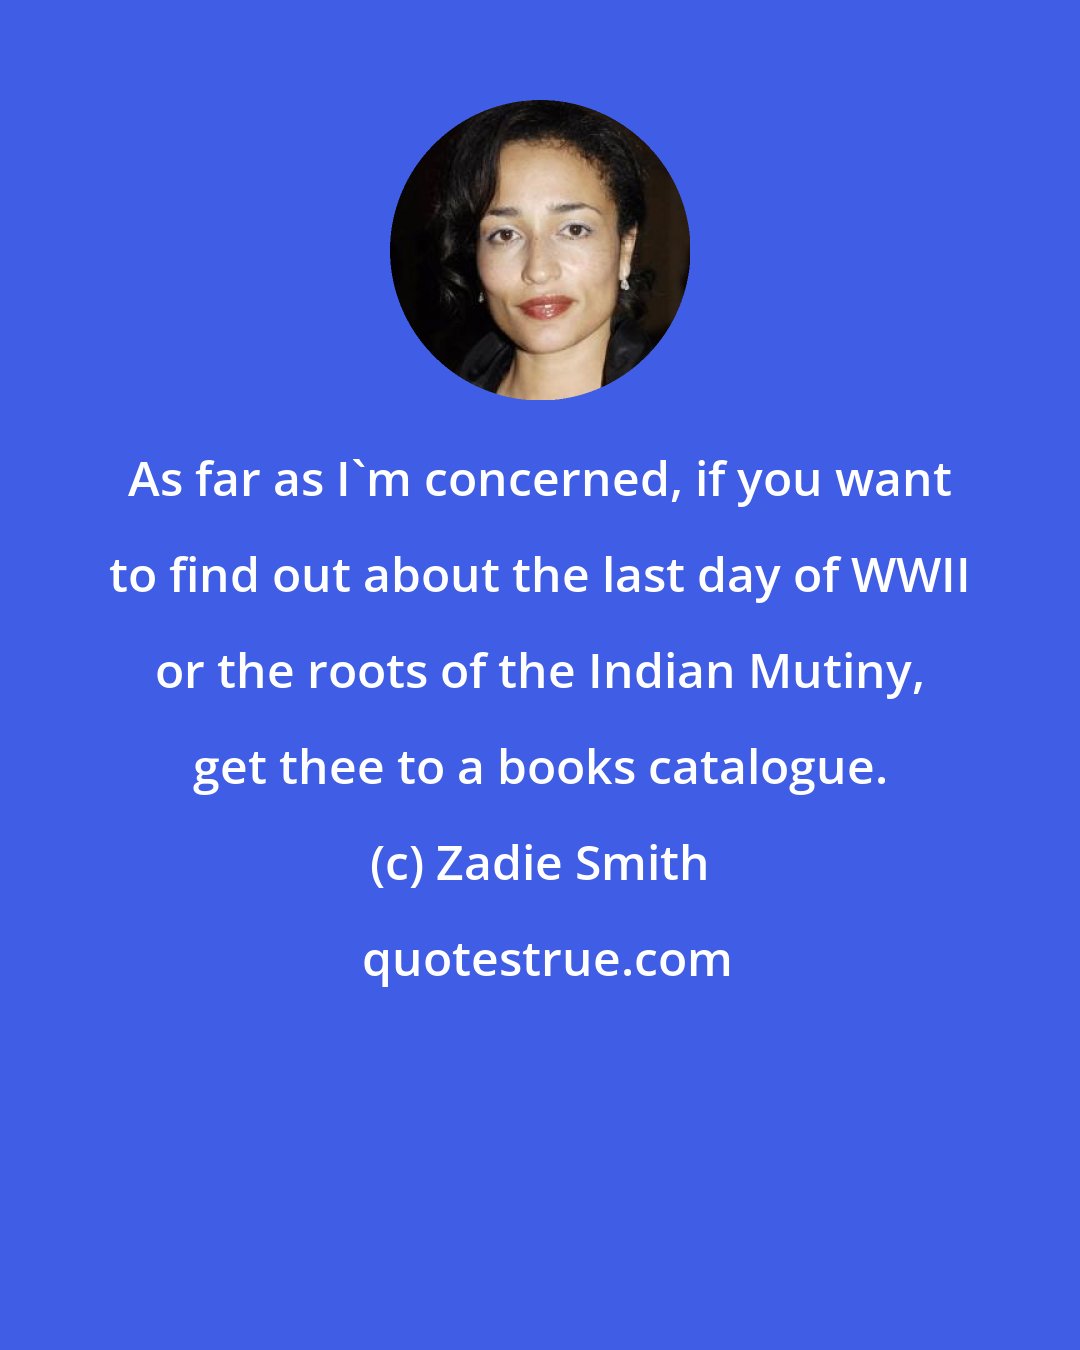 Zadie Smith: As far as I'm concerned, if you want to find out about the last day of WWII or the roots of the Indian Mutiny, get thee to a books catalogue.